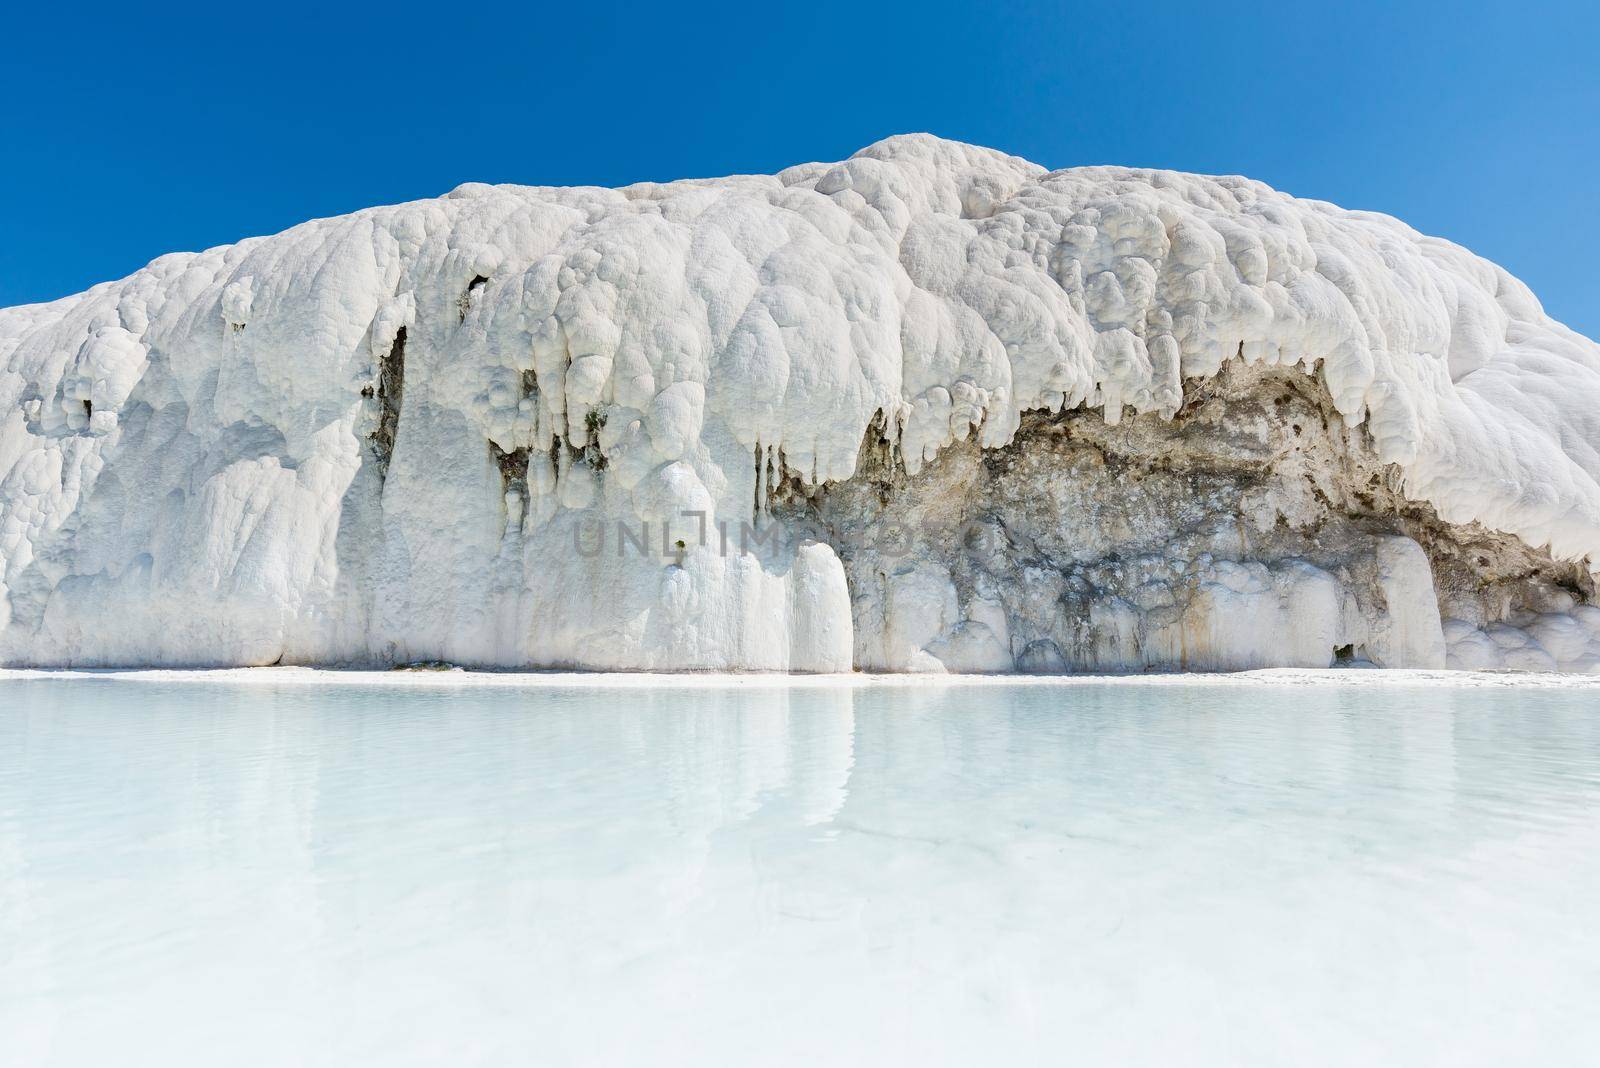 Natural travertine pools and terraces at Pamukkale ,Turkey. Pamukkale, meaning cotton castle in Turkish,Turkey by Nuamfolio